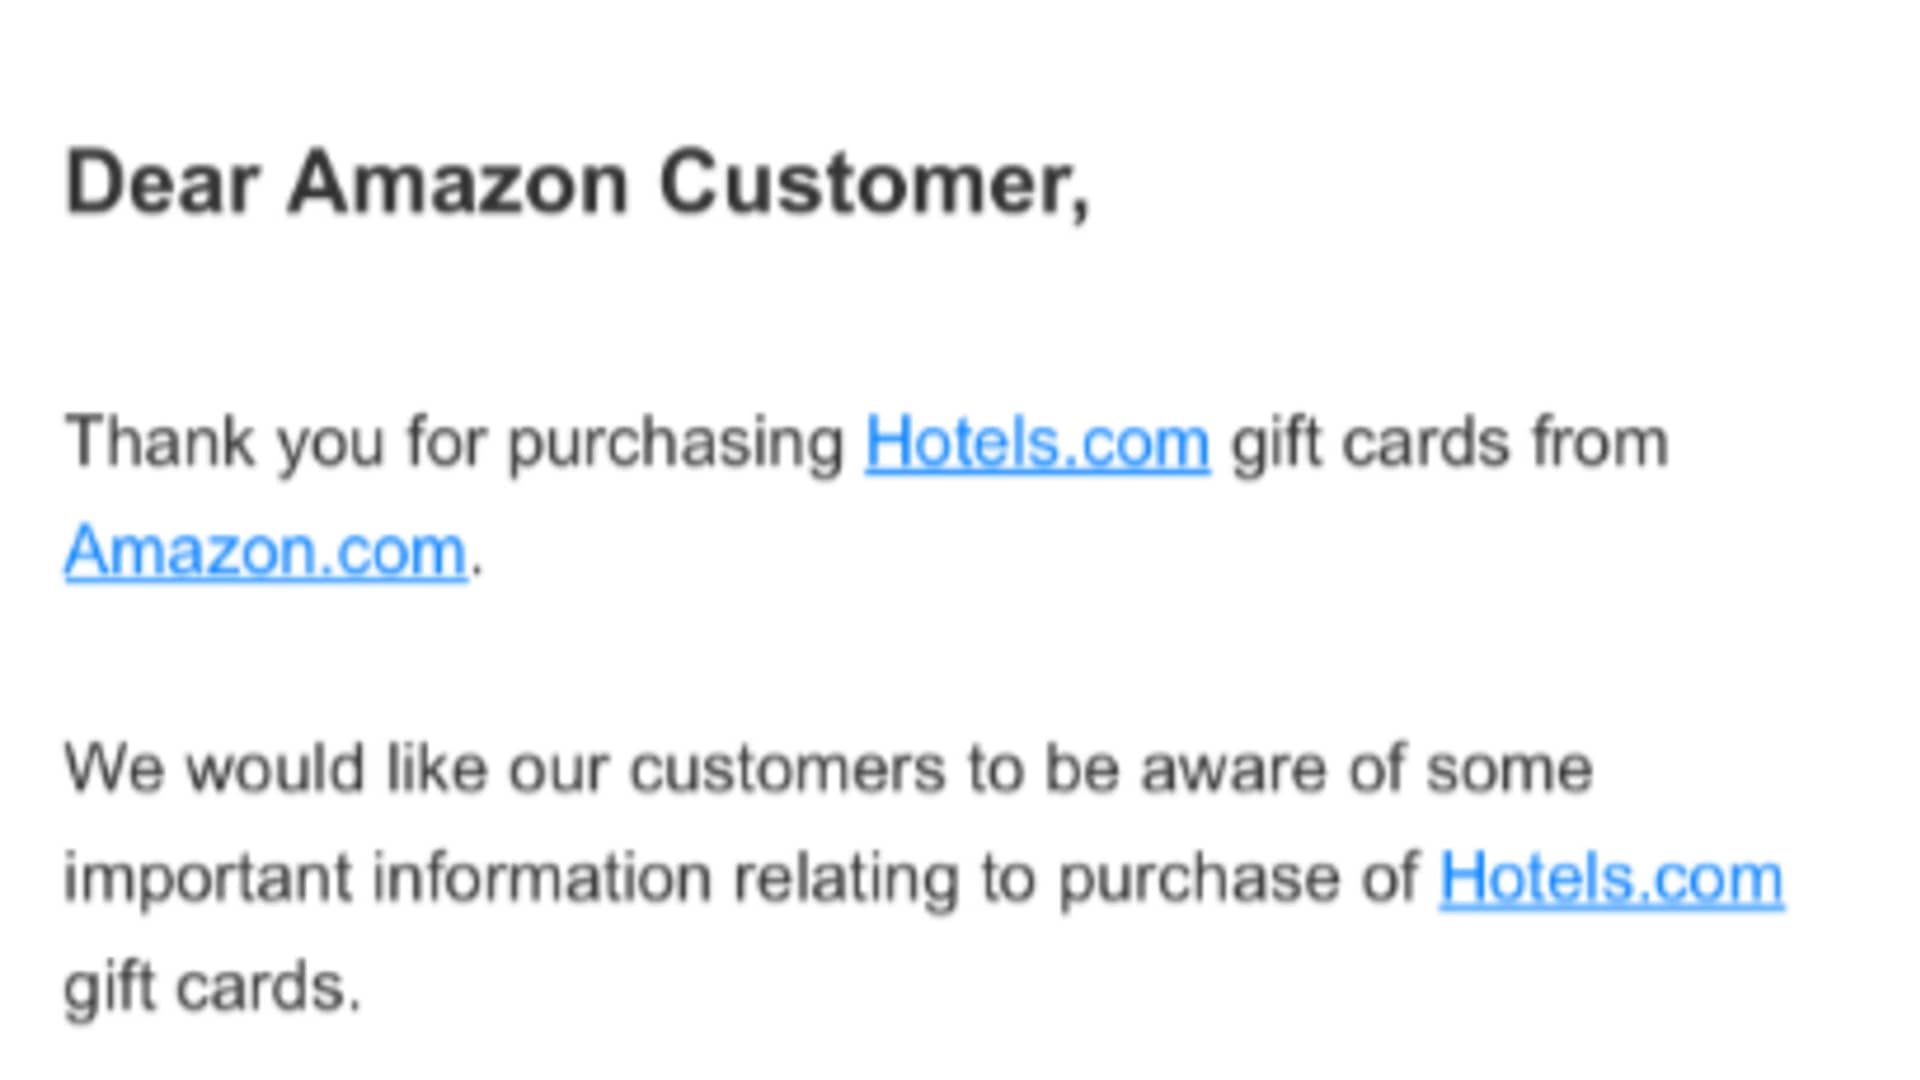 Part of one of the emails that was sent to a number of Amazon customers over the weekend, falsely confirming gift card purchases that had not been made.